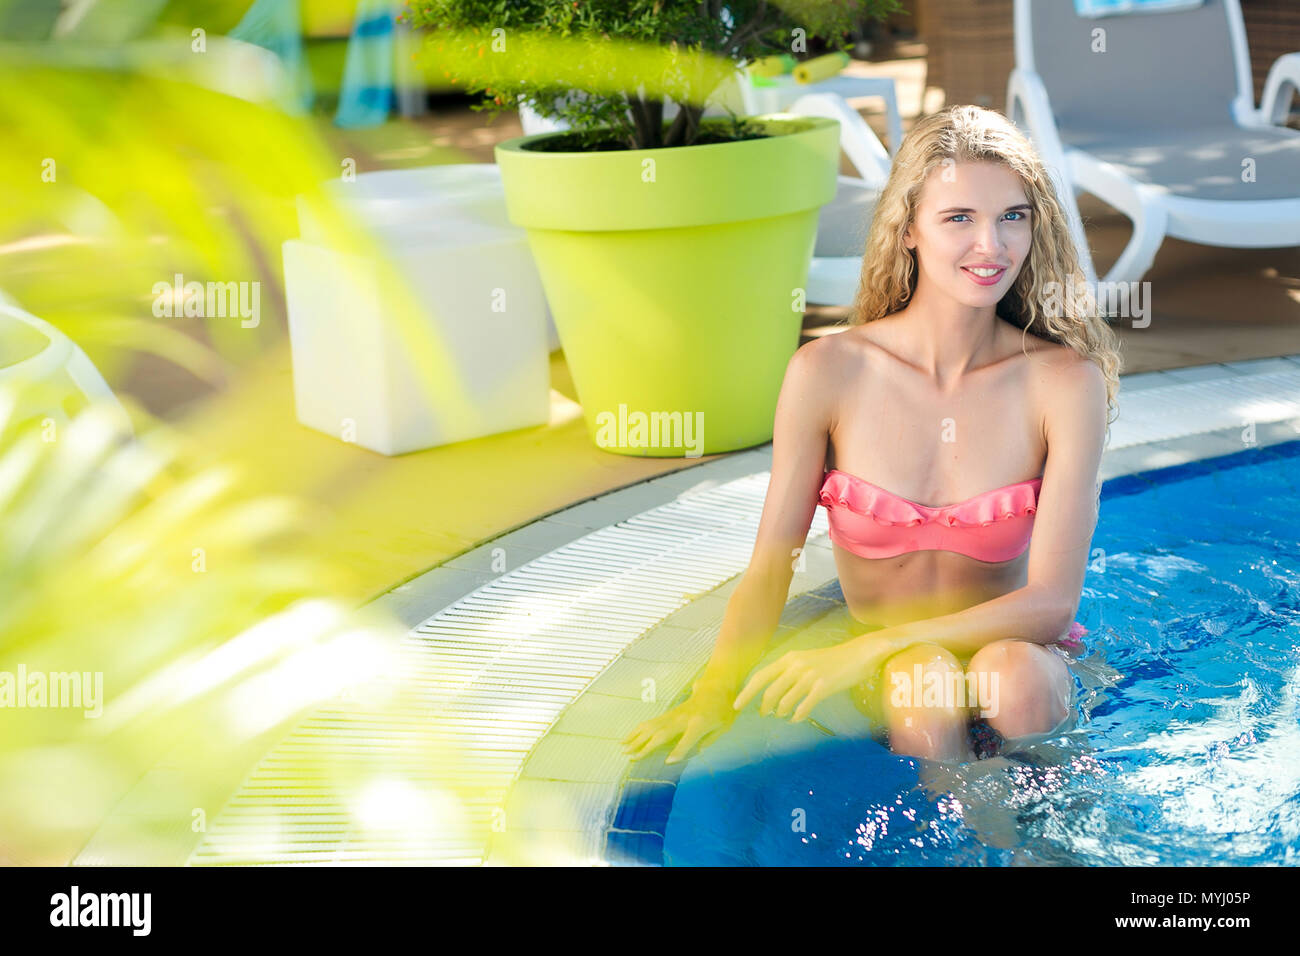 hotel, tourism, resort concept. young girl is sitting in the swimming pool by this edge where placed a huge pot with some tree and a few deck chairs Stock Photo